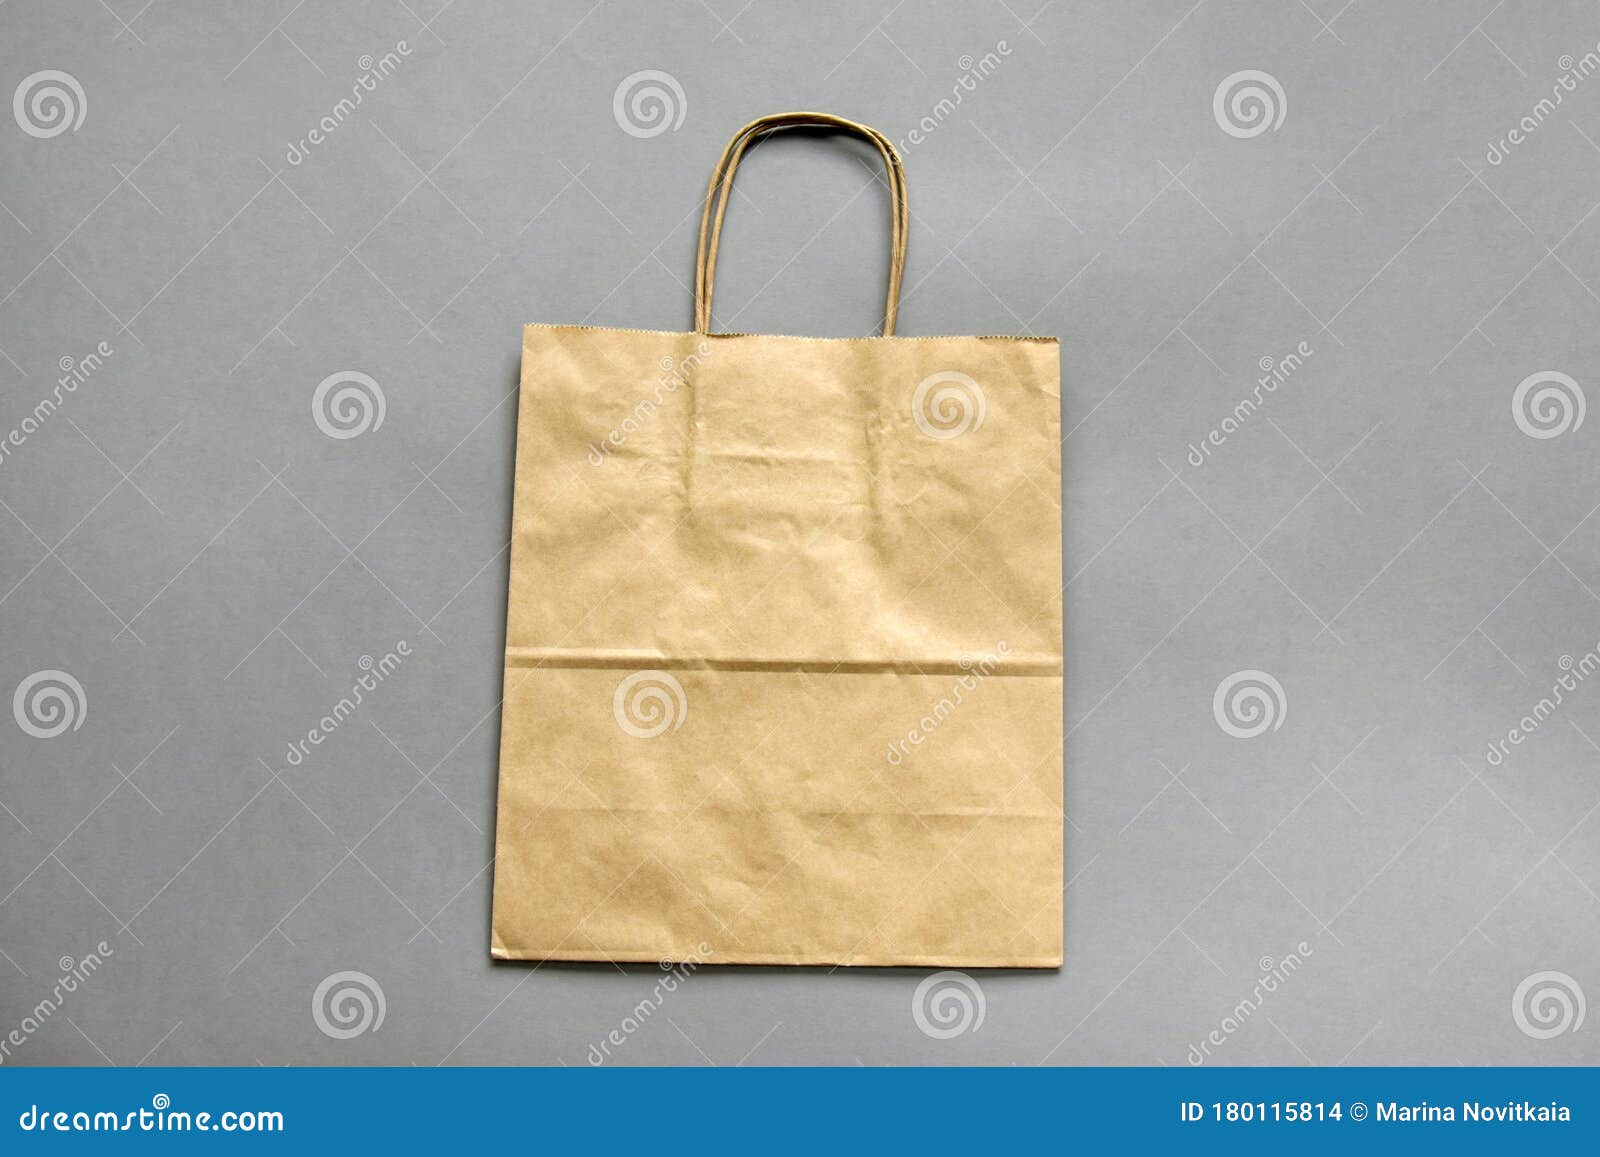 Download One Empty Brown Shopping Bag With Handles On Gray ...